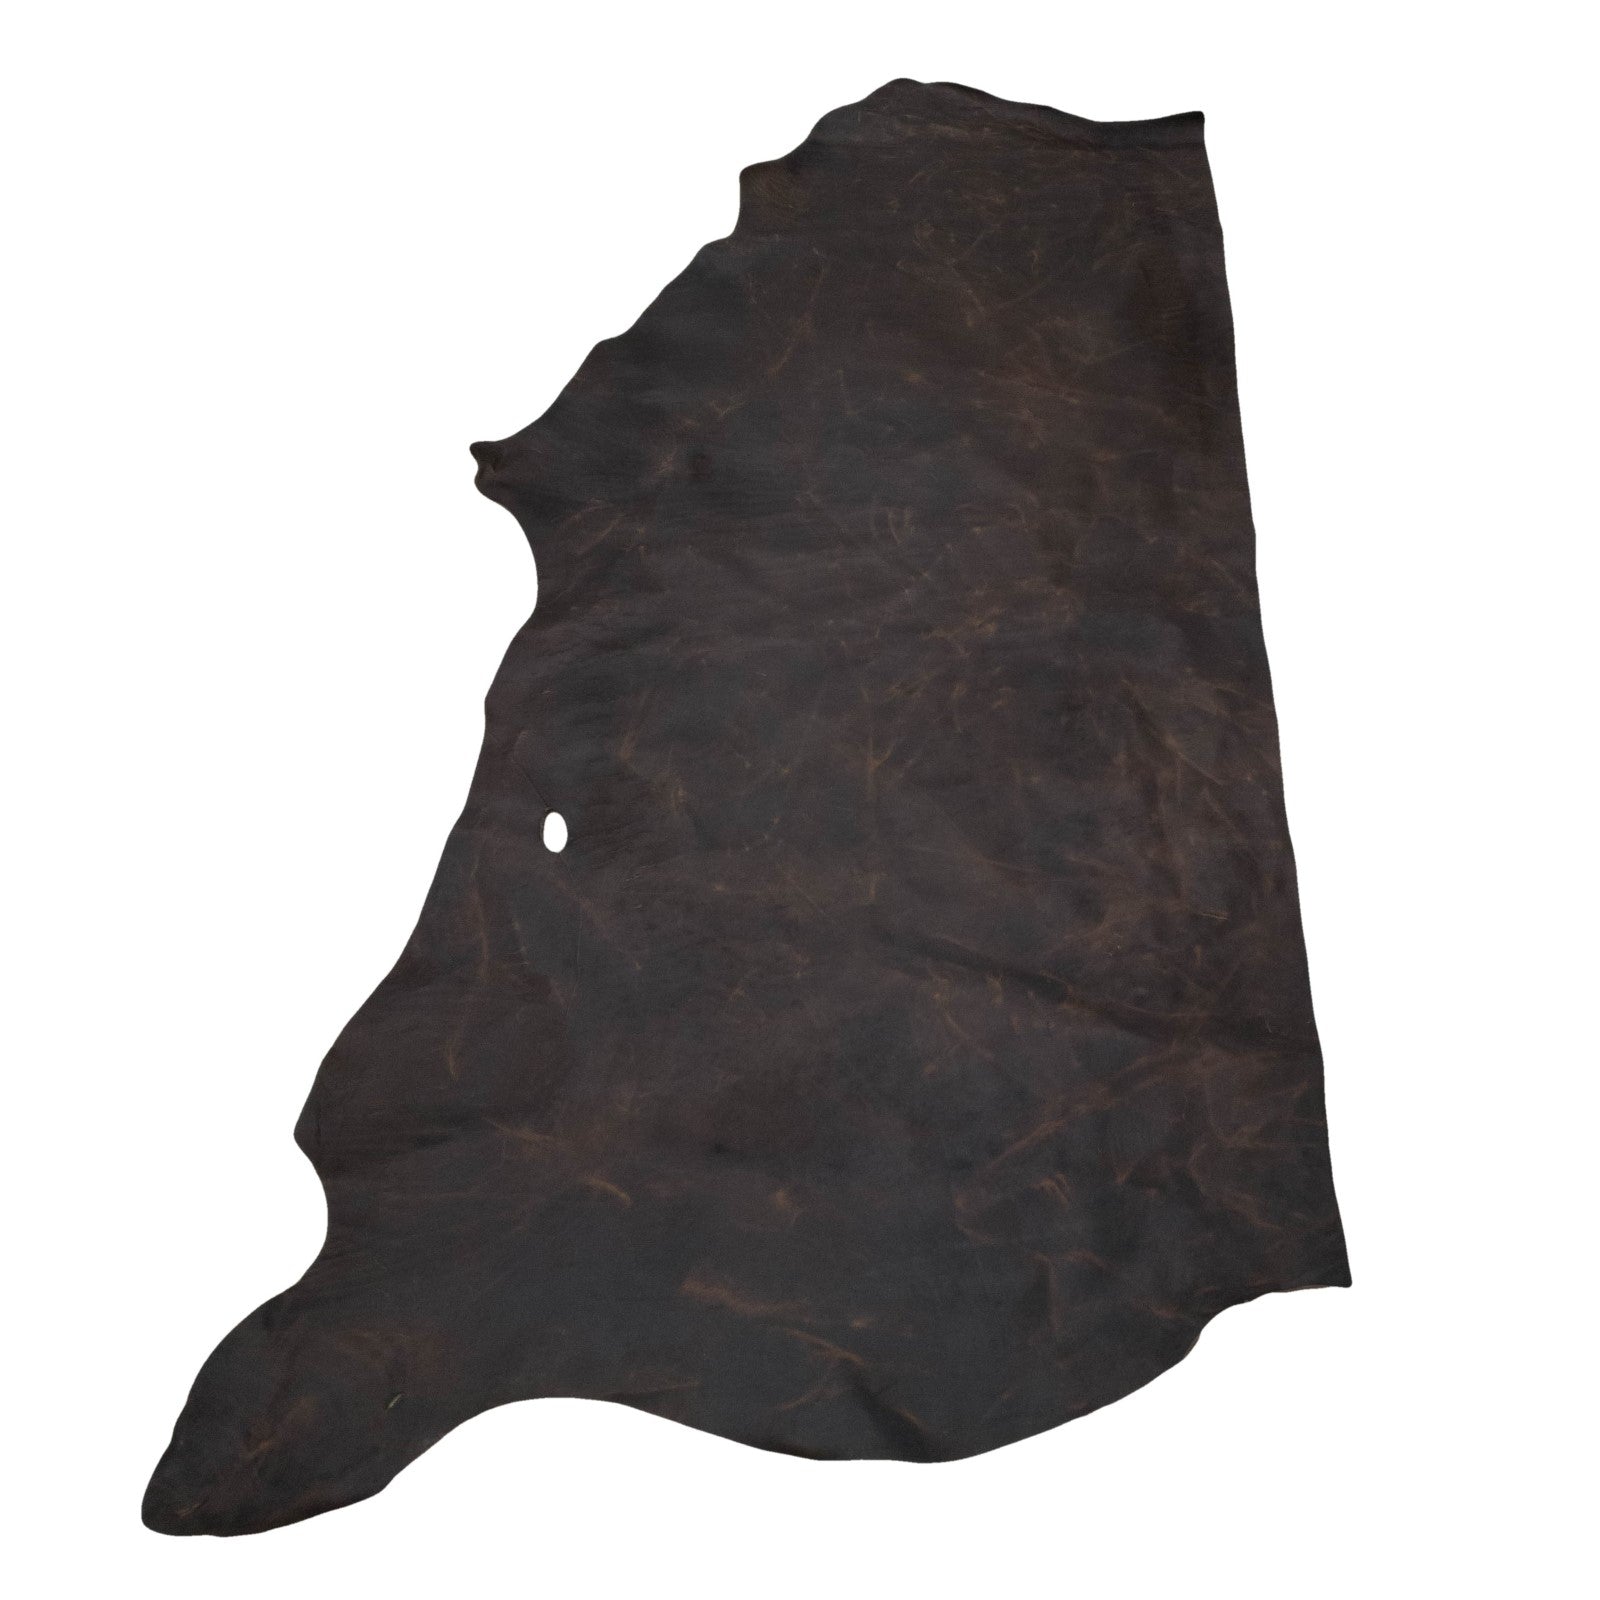 Sleeping Bear Dark Brown, 6.5-32 SqFt, 2-3 oz, Pull up Sides & Pieces, Crazy Buffalo, Side / 18-20 | The Leather Guy